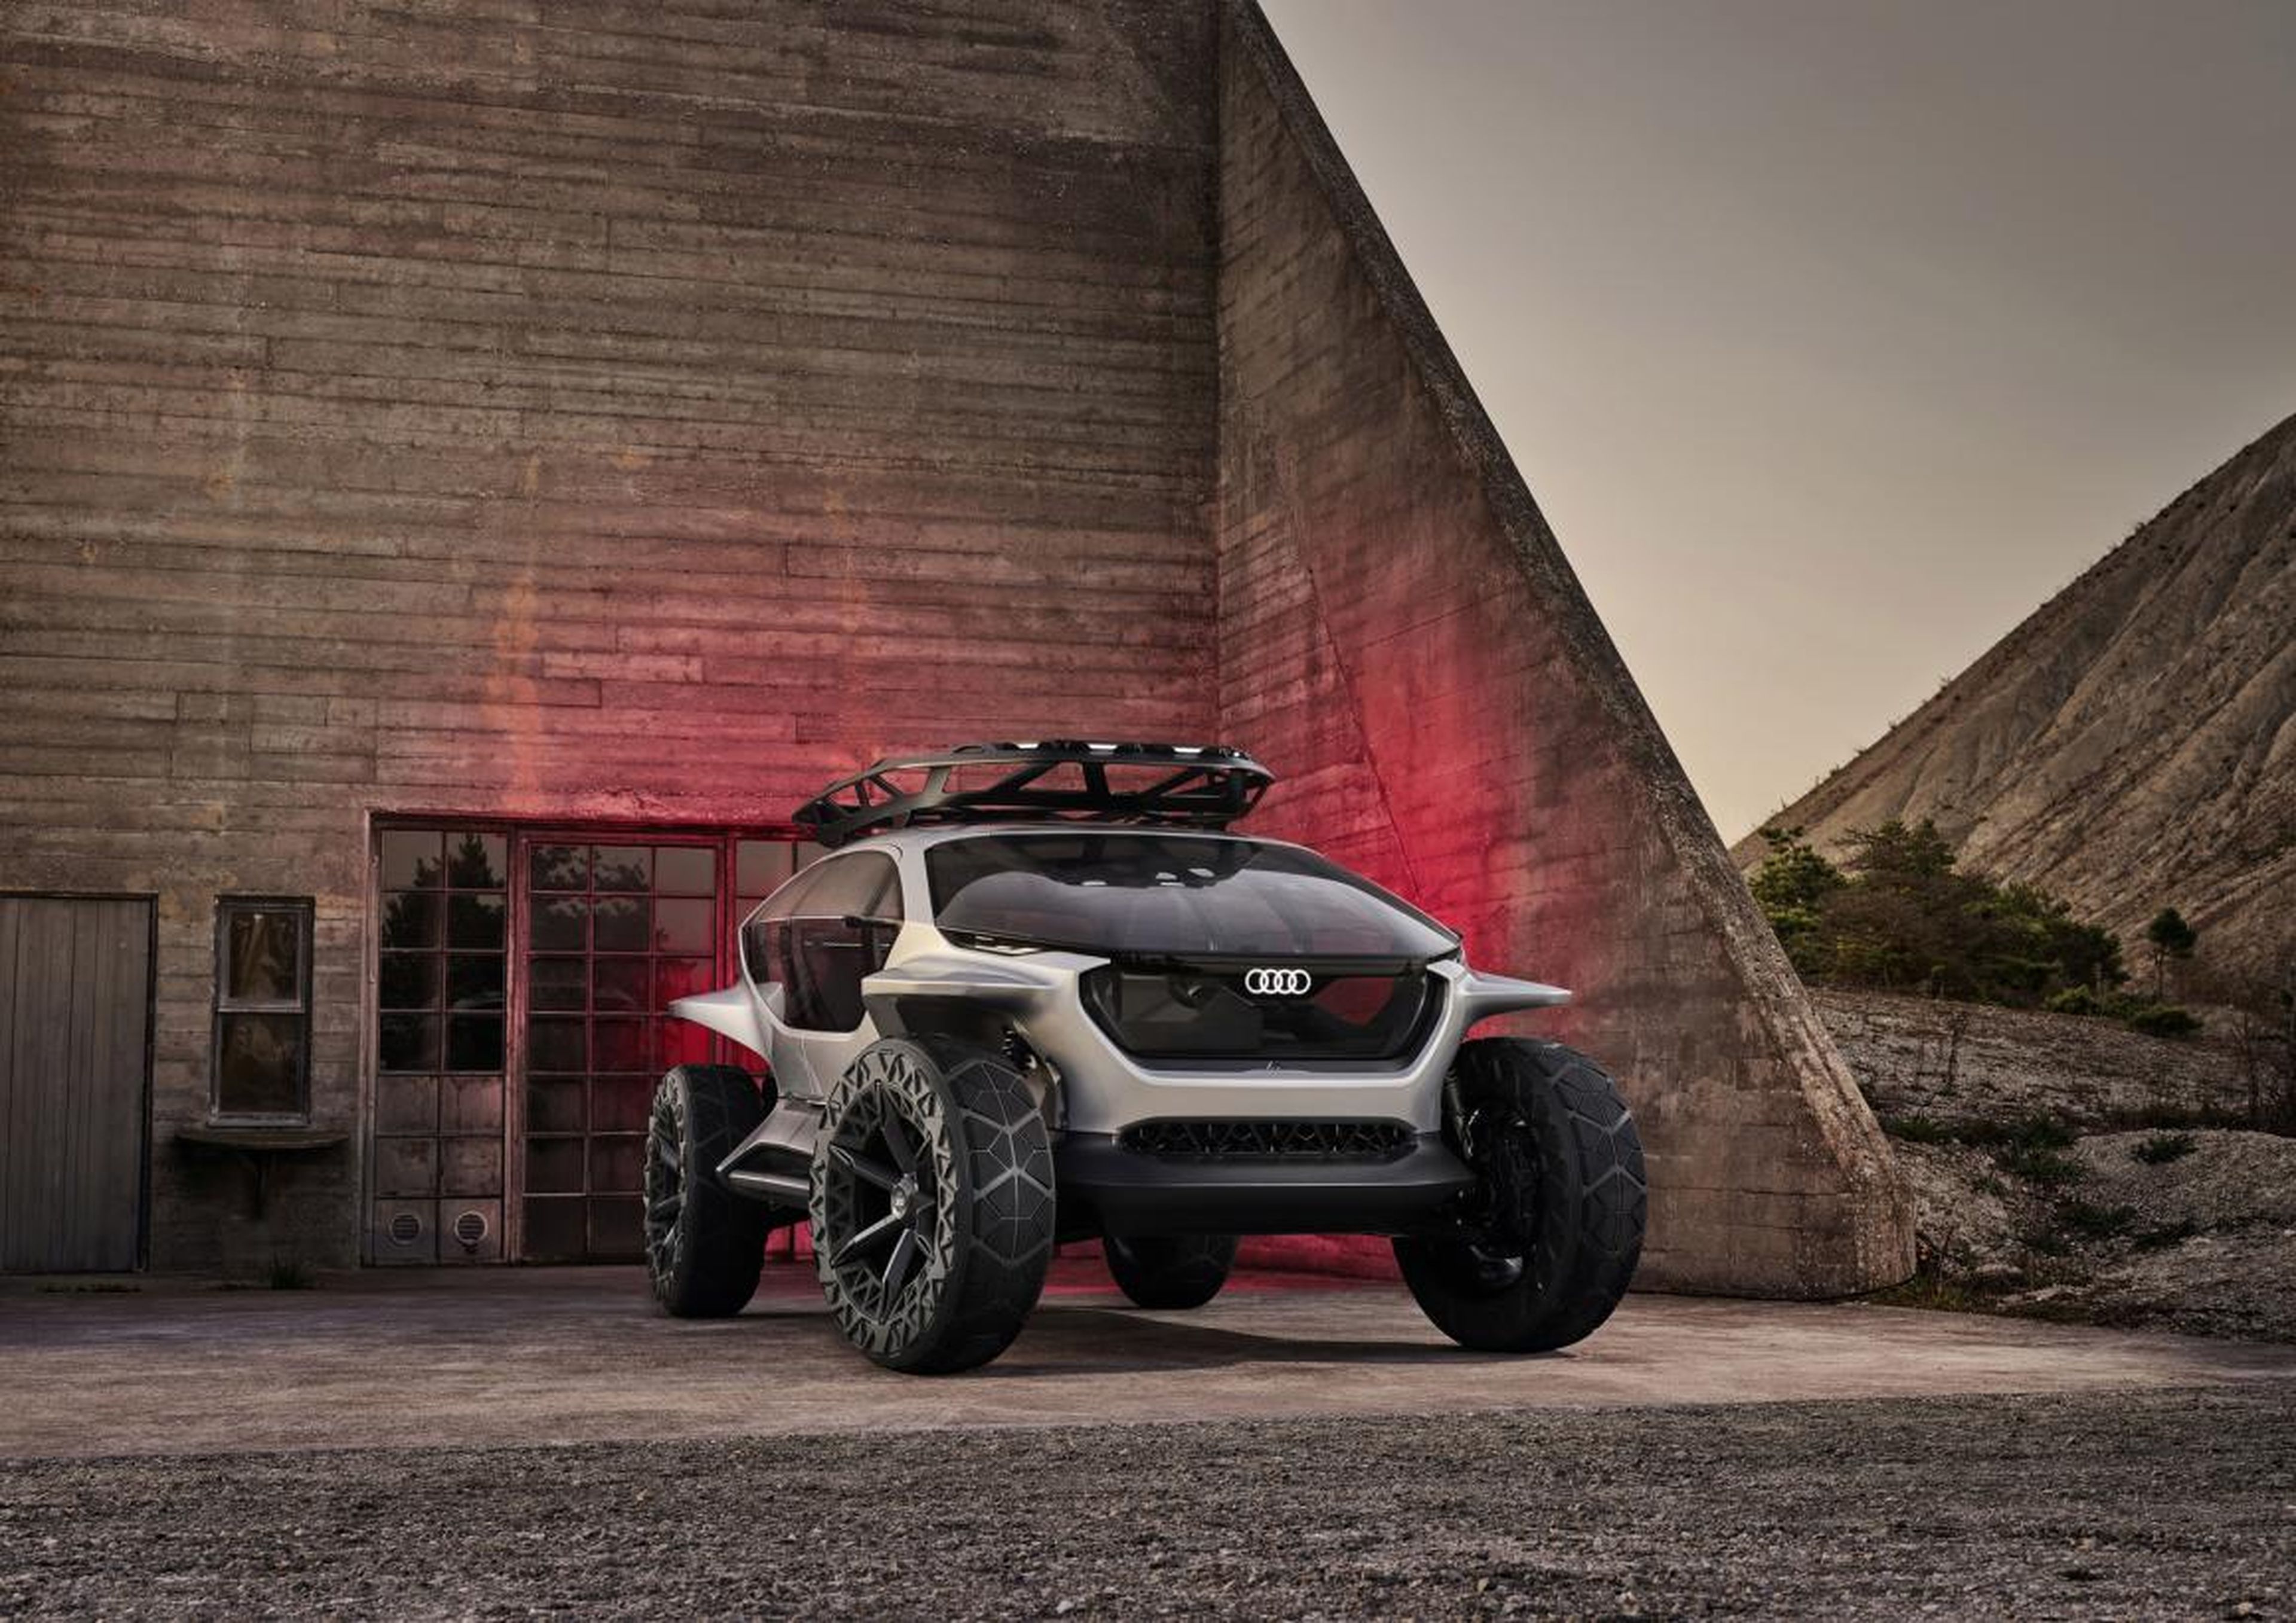 Audi showed its wild AI:TRAIL concept, an all-electric, autonomous off-roader that capitalizes on Audi's rally-racing heritage and the legendary quattro all-wheel-drive system. It has drones instead of headlights!